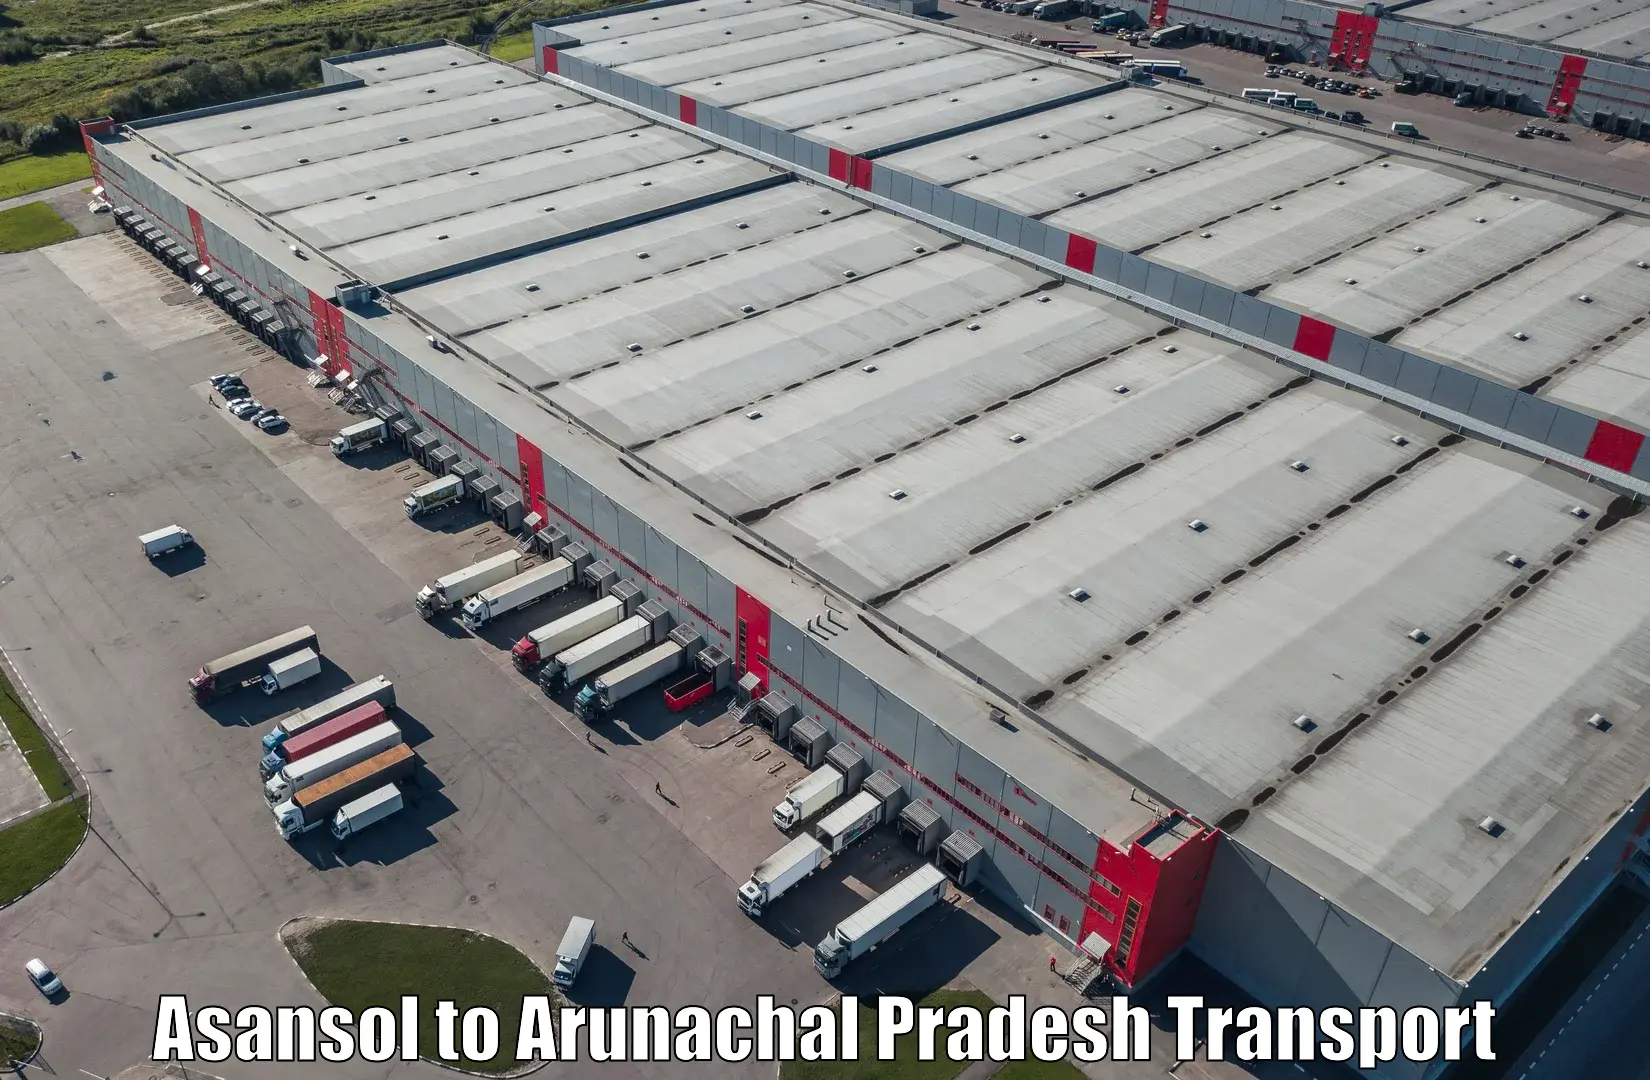 Truck transport companies in India Asansol to Pasighat